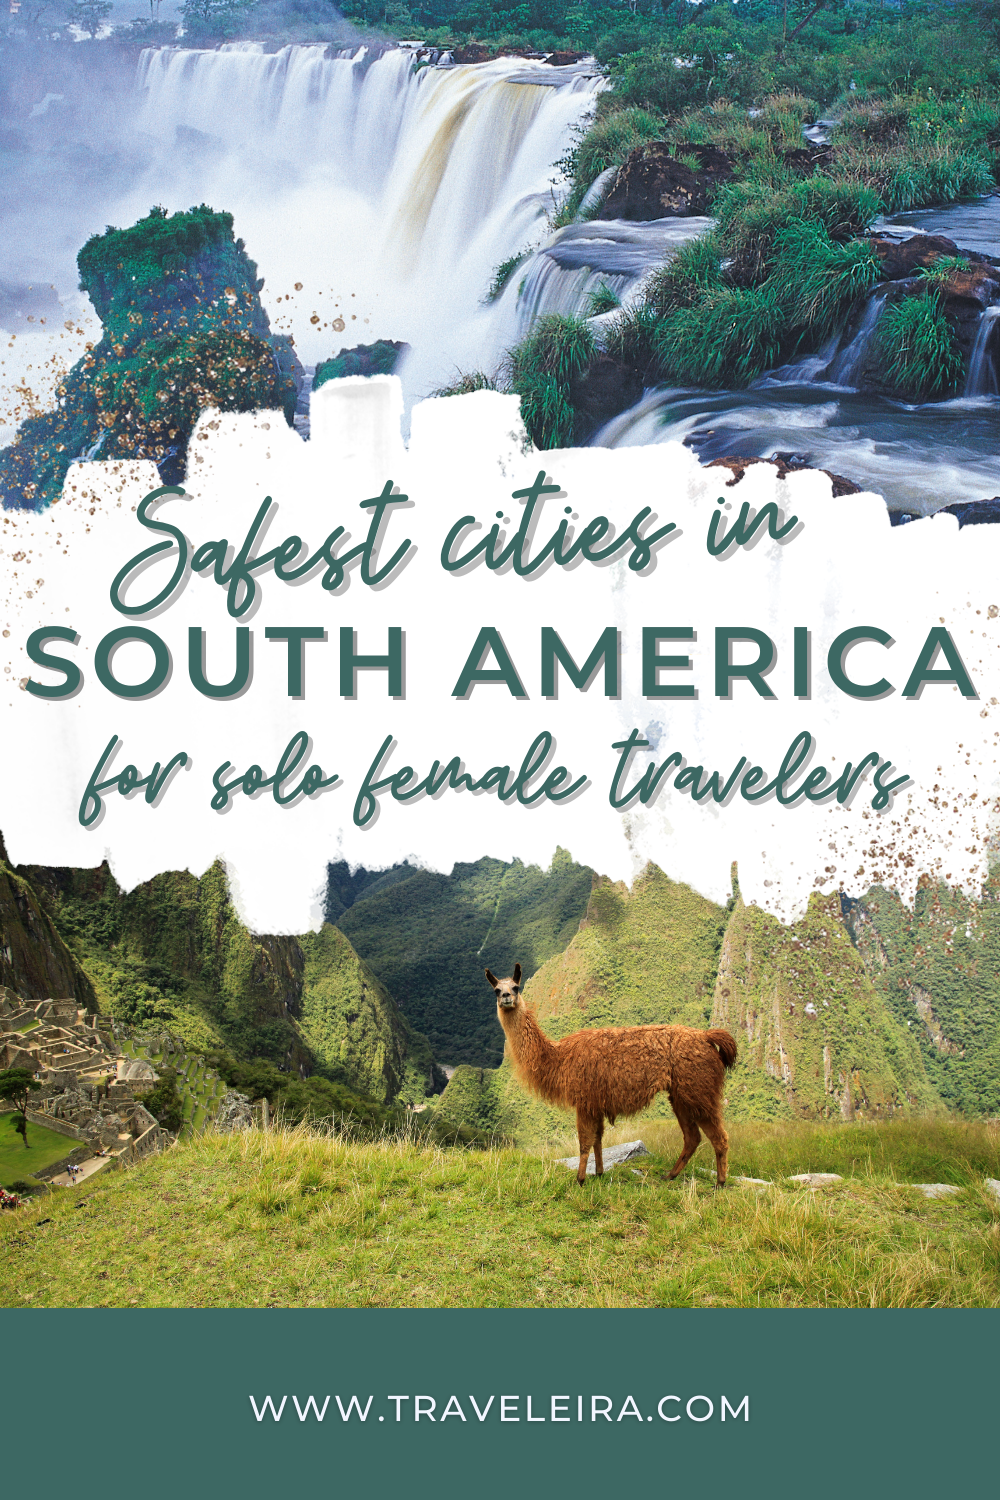 Discover the safest cities in South America for a Solo Female Traveler. Plan your journey with confidence for your solo travel in South America